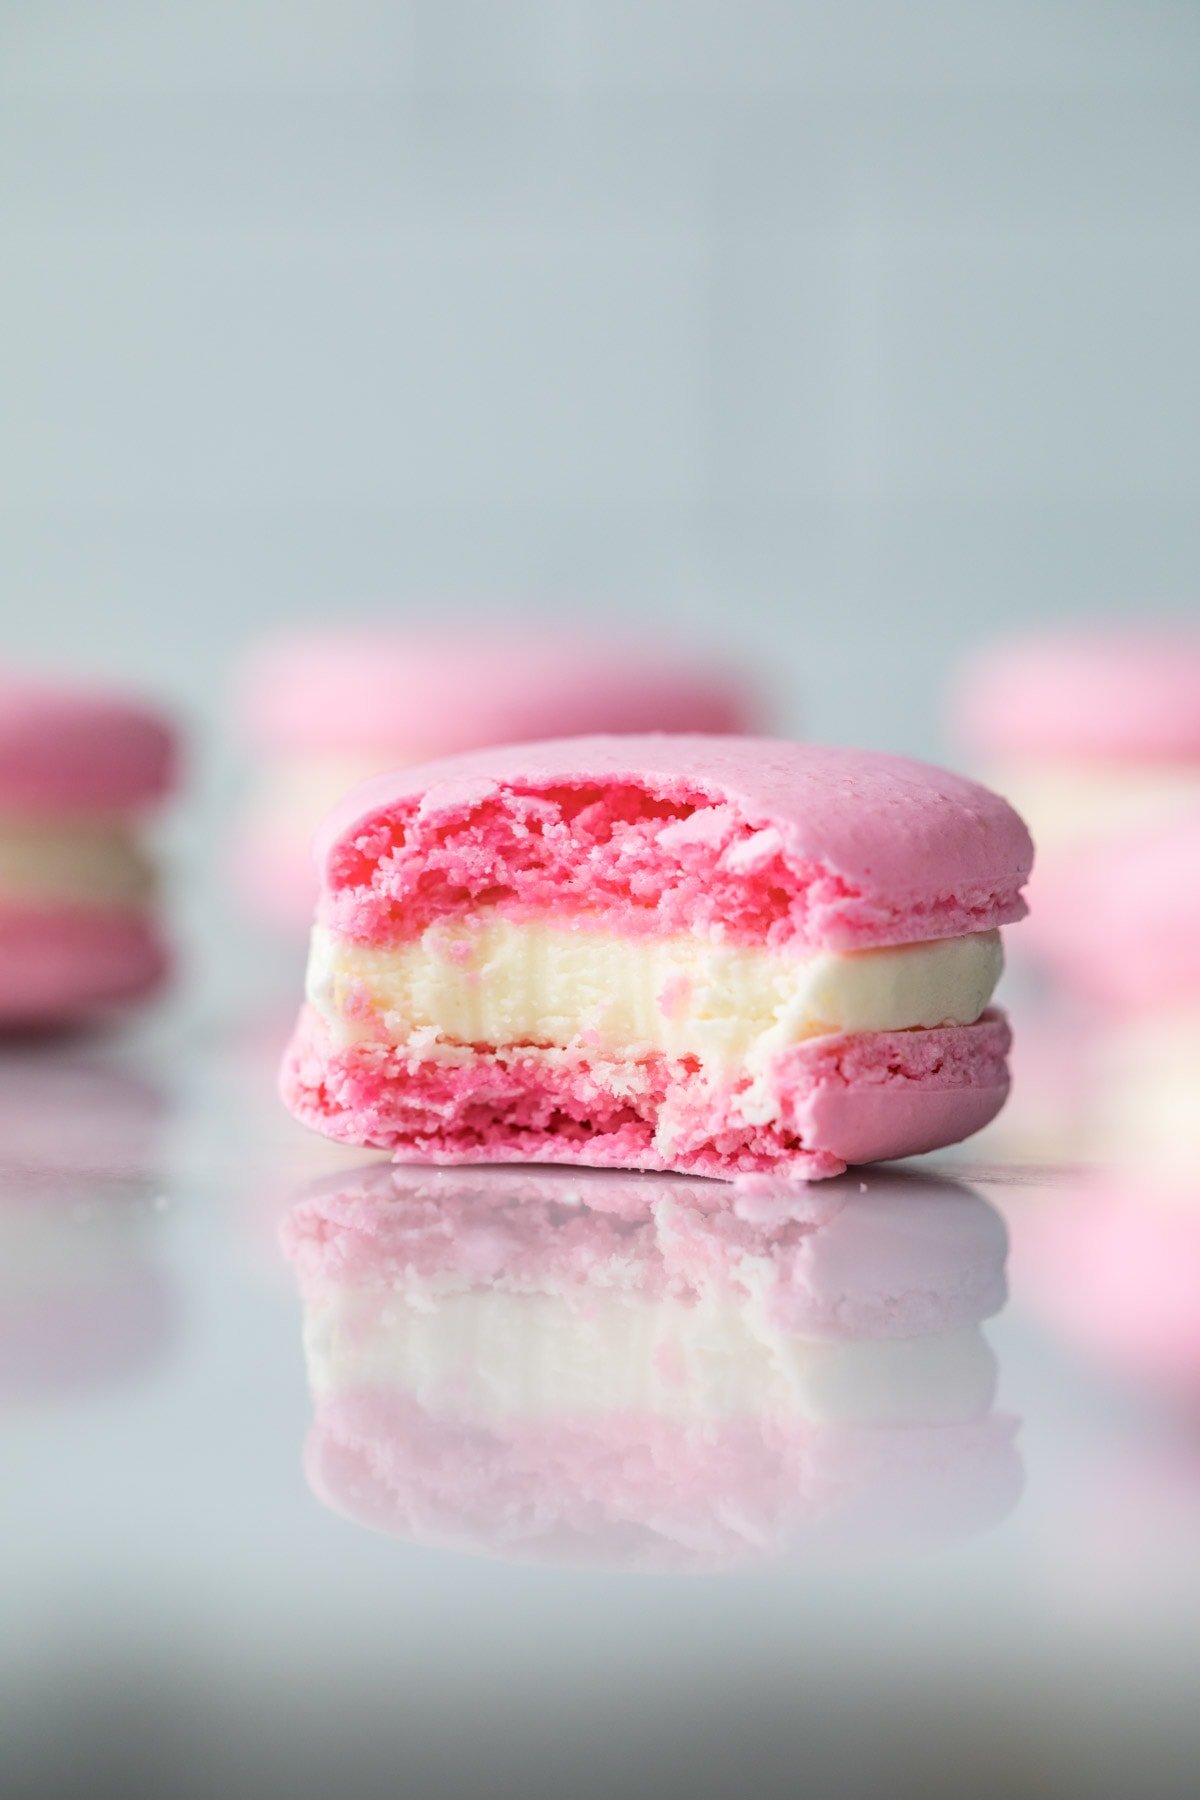 Macaron that has been bitten into, showing full shells and frosting layer